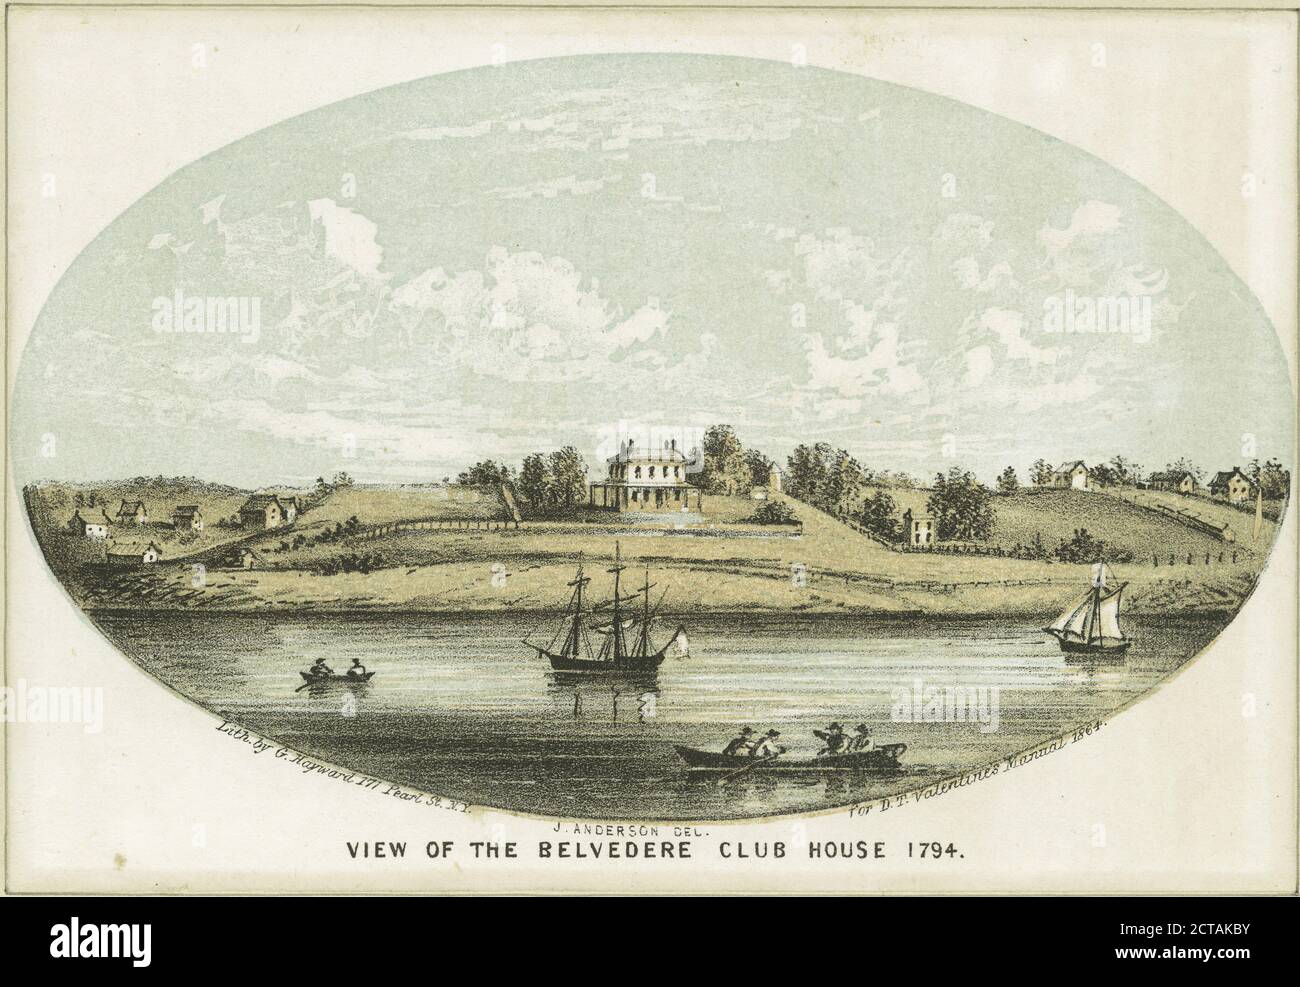 View of the Belvedere Club House 1794, still image, Prints, 1828 - 1890 Stock Photo